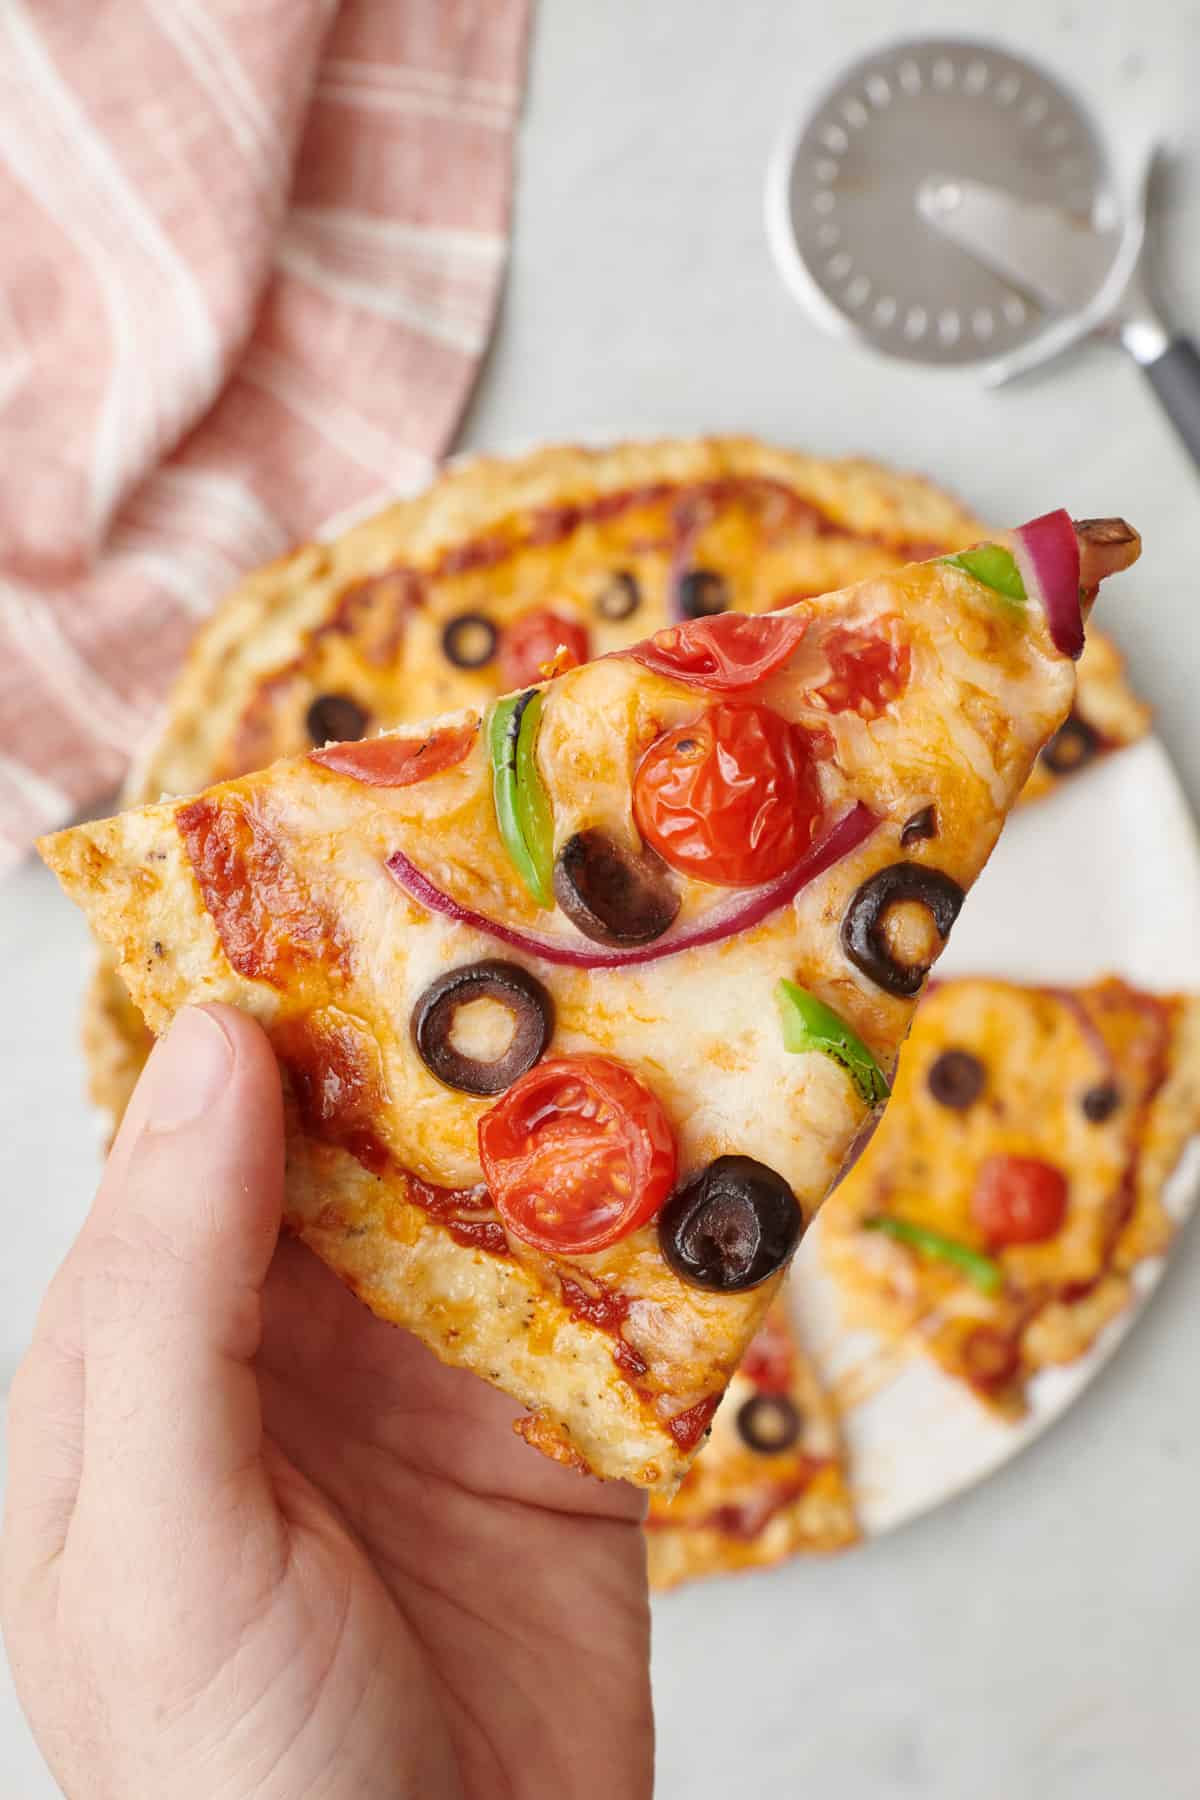 Hand holding a chicken crust pizza with toppings up close.